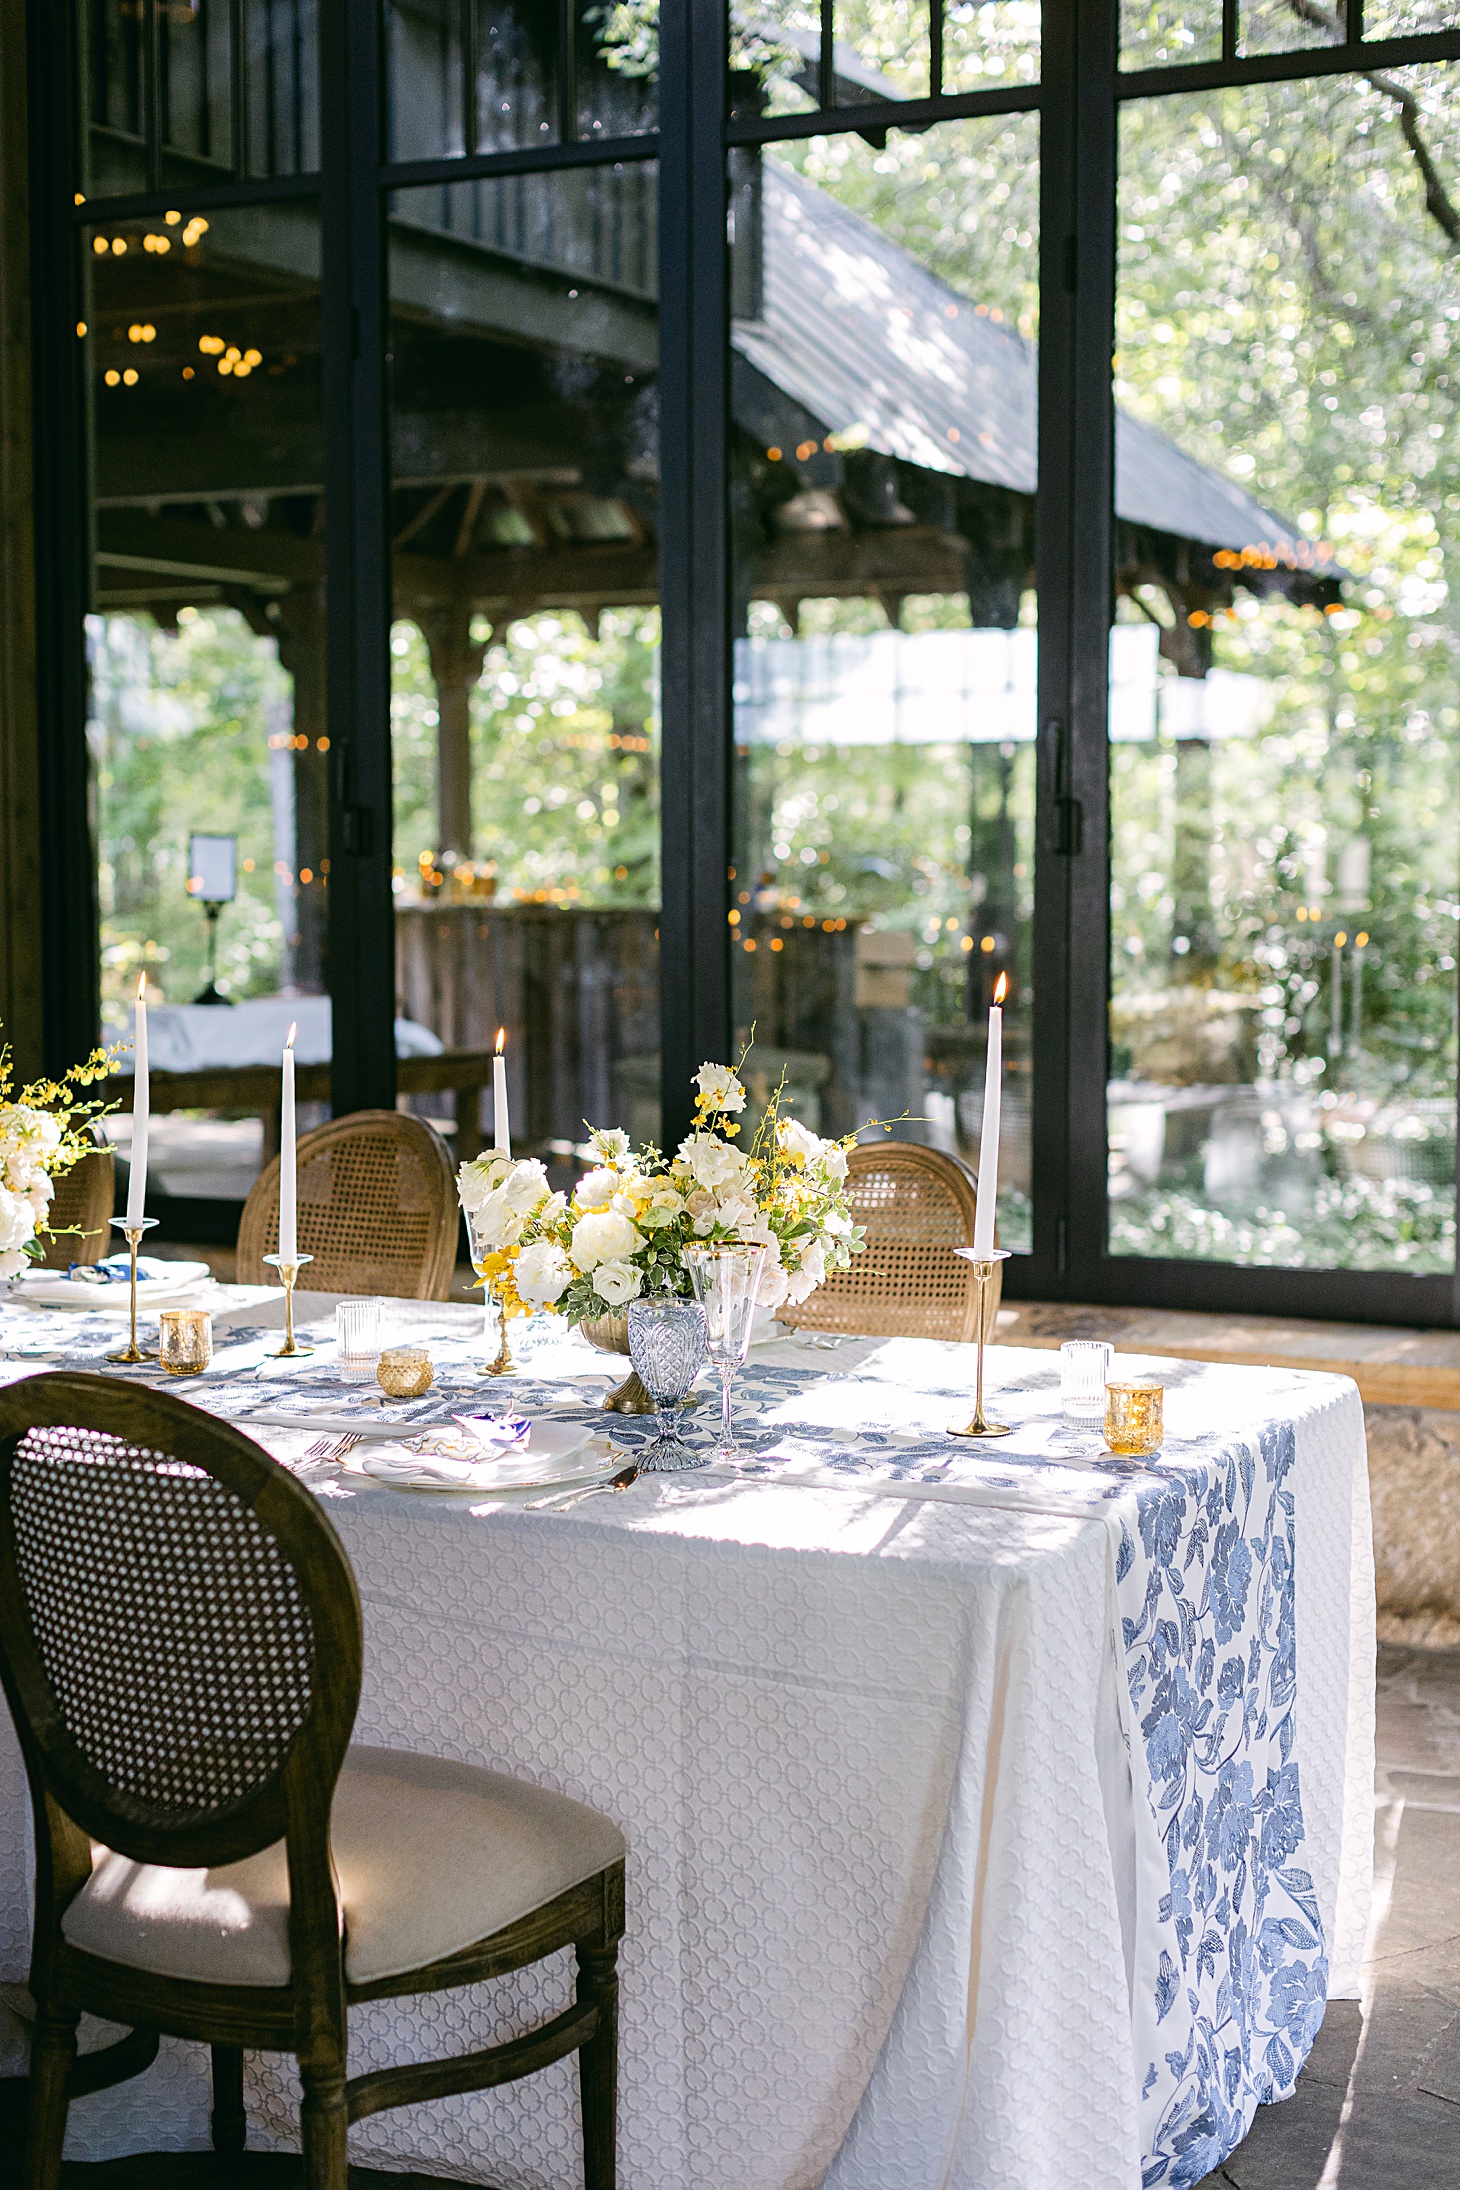 Custom blue and white table runner  at The Farm at Old Edwards Inn wedding by Sarah Bradshaw Photography